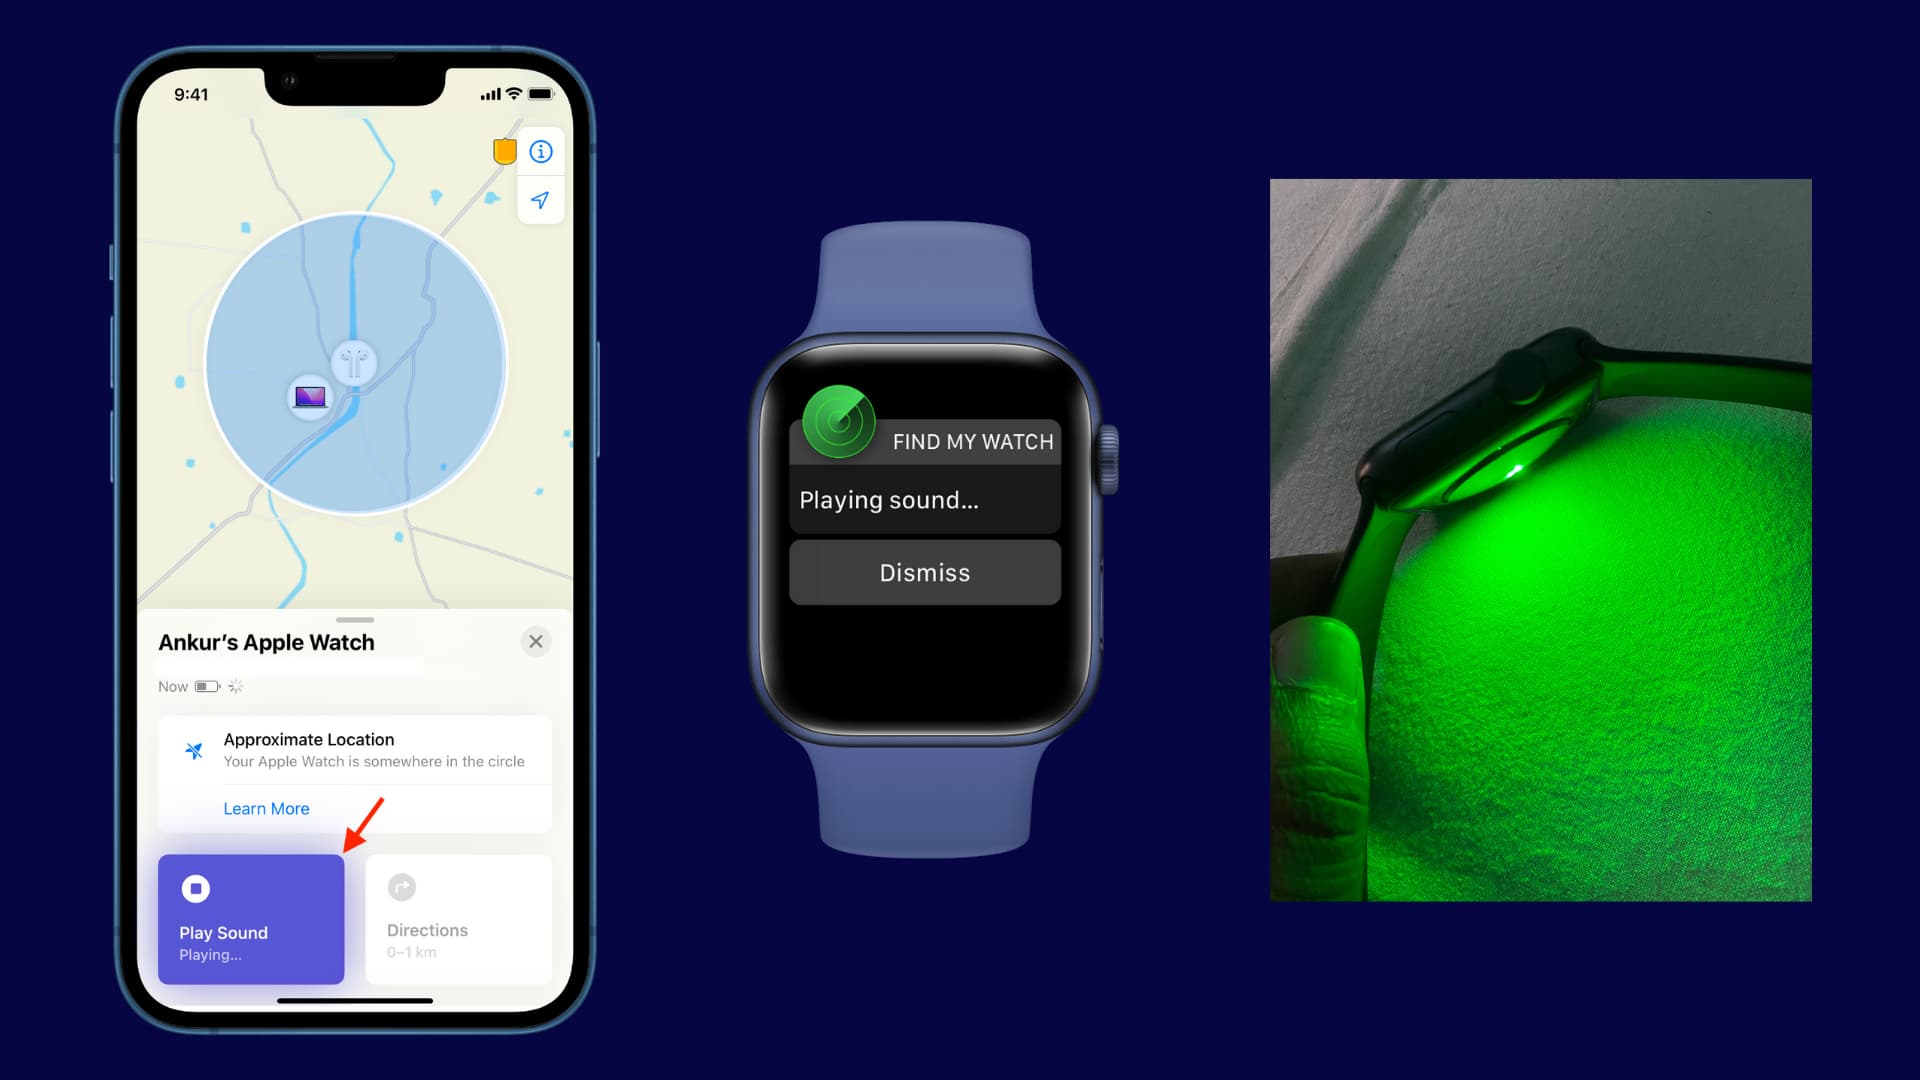 Green light flashing on Apple Watch while playing sound via Find My